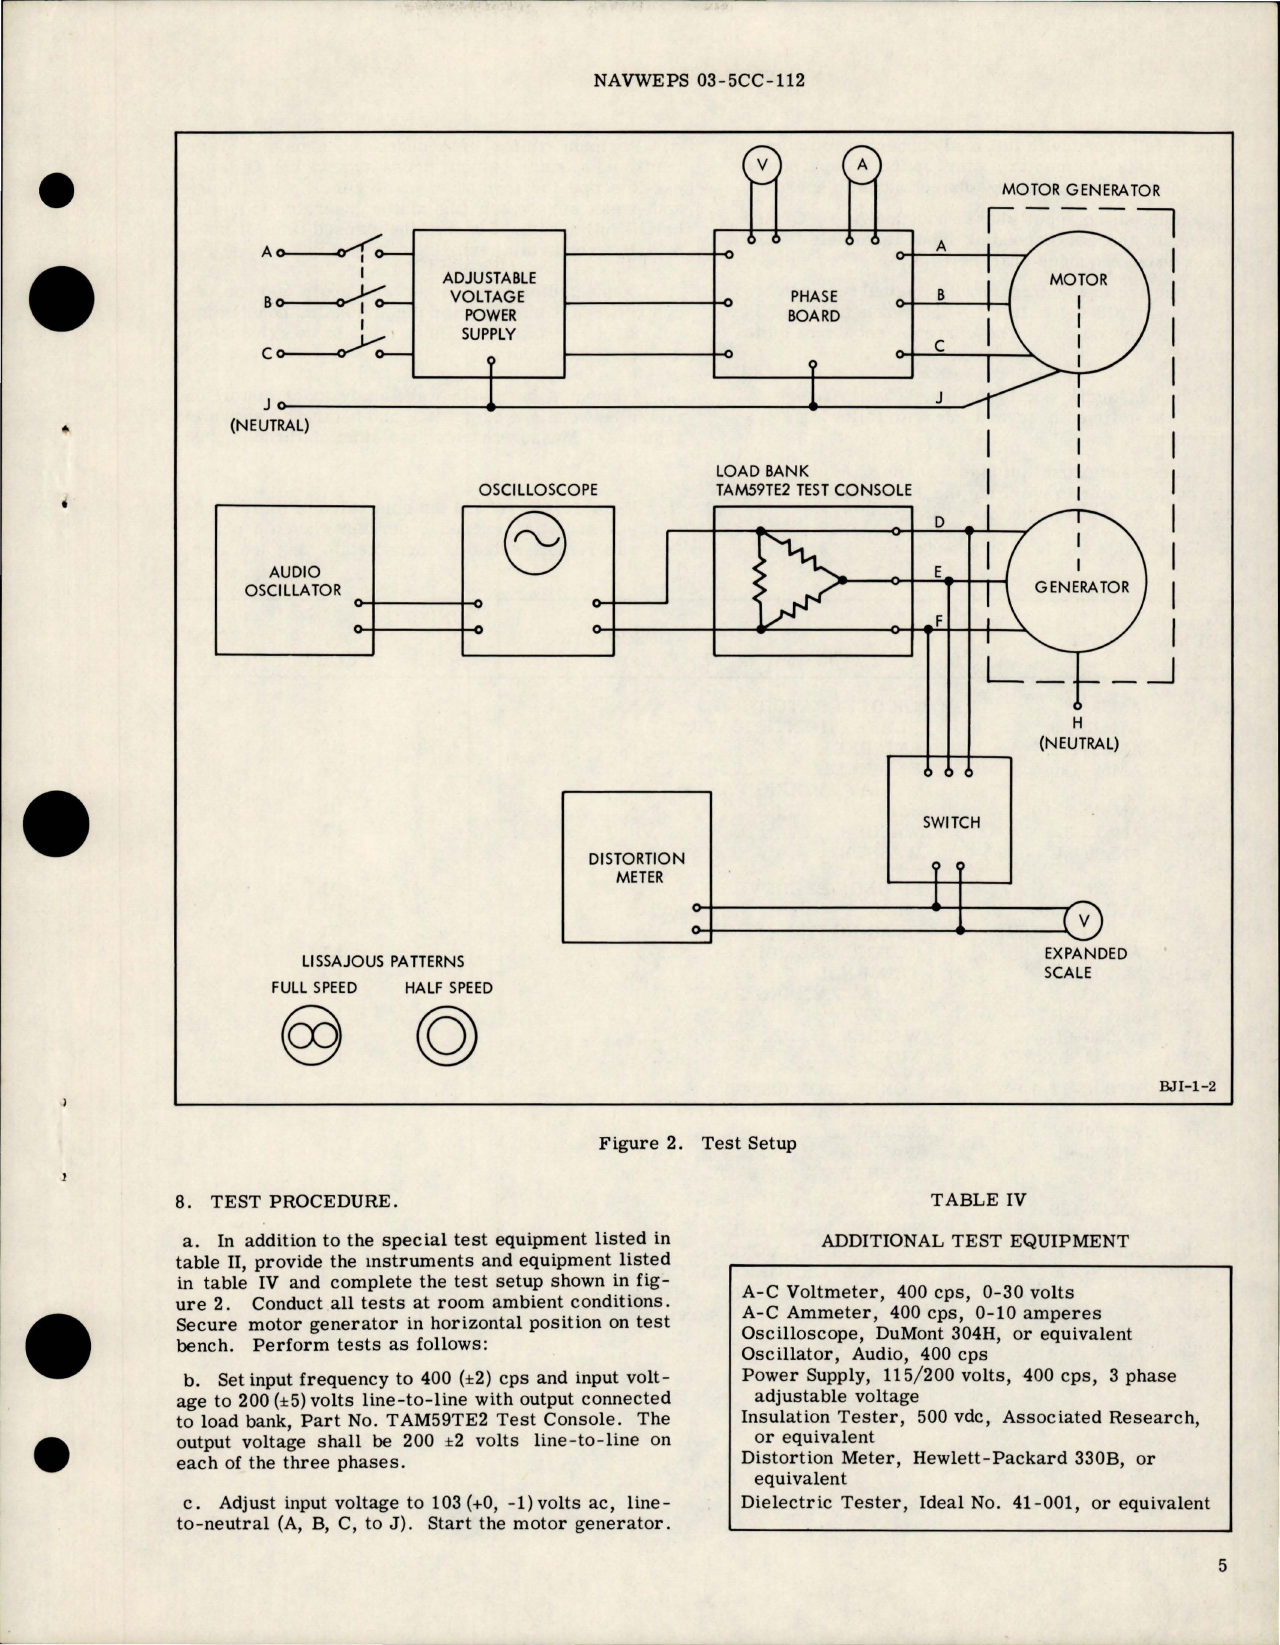 Sample page 5 from AirCorps Library document: Overhaul Instructions with Parts Breakdown for Motor Generator - Part AM59 